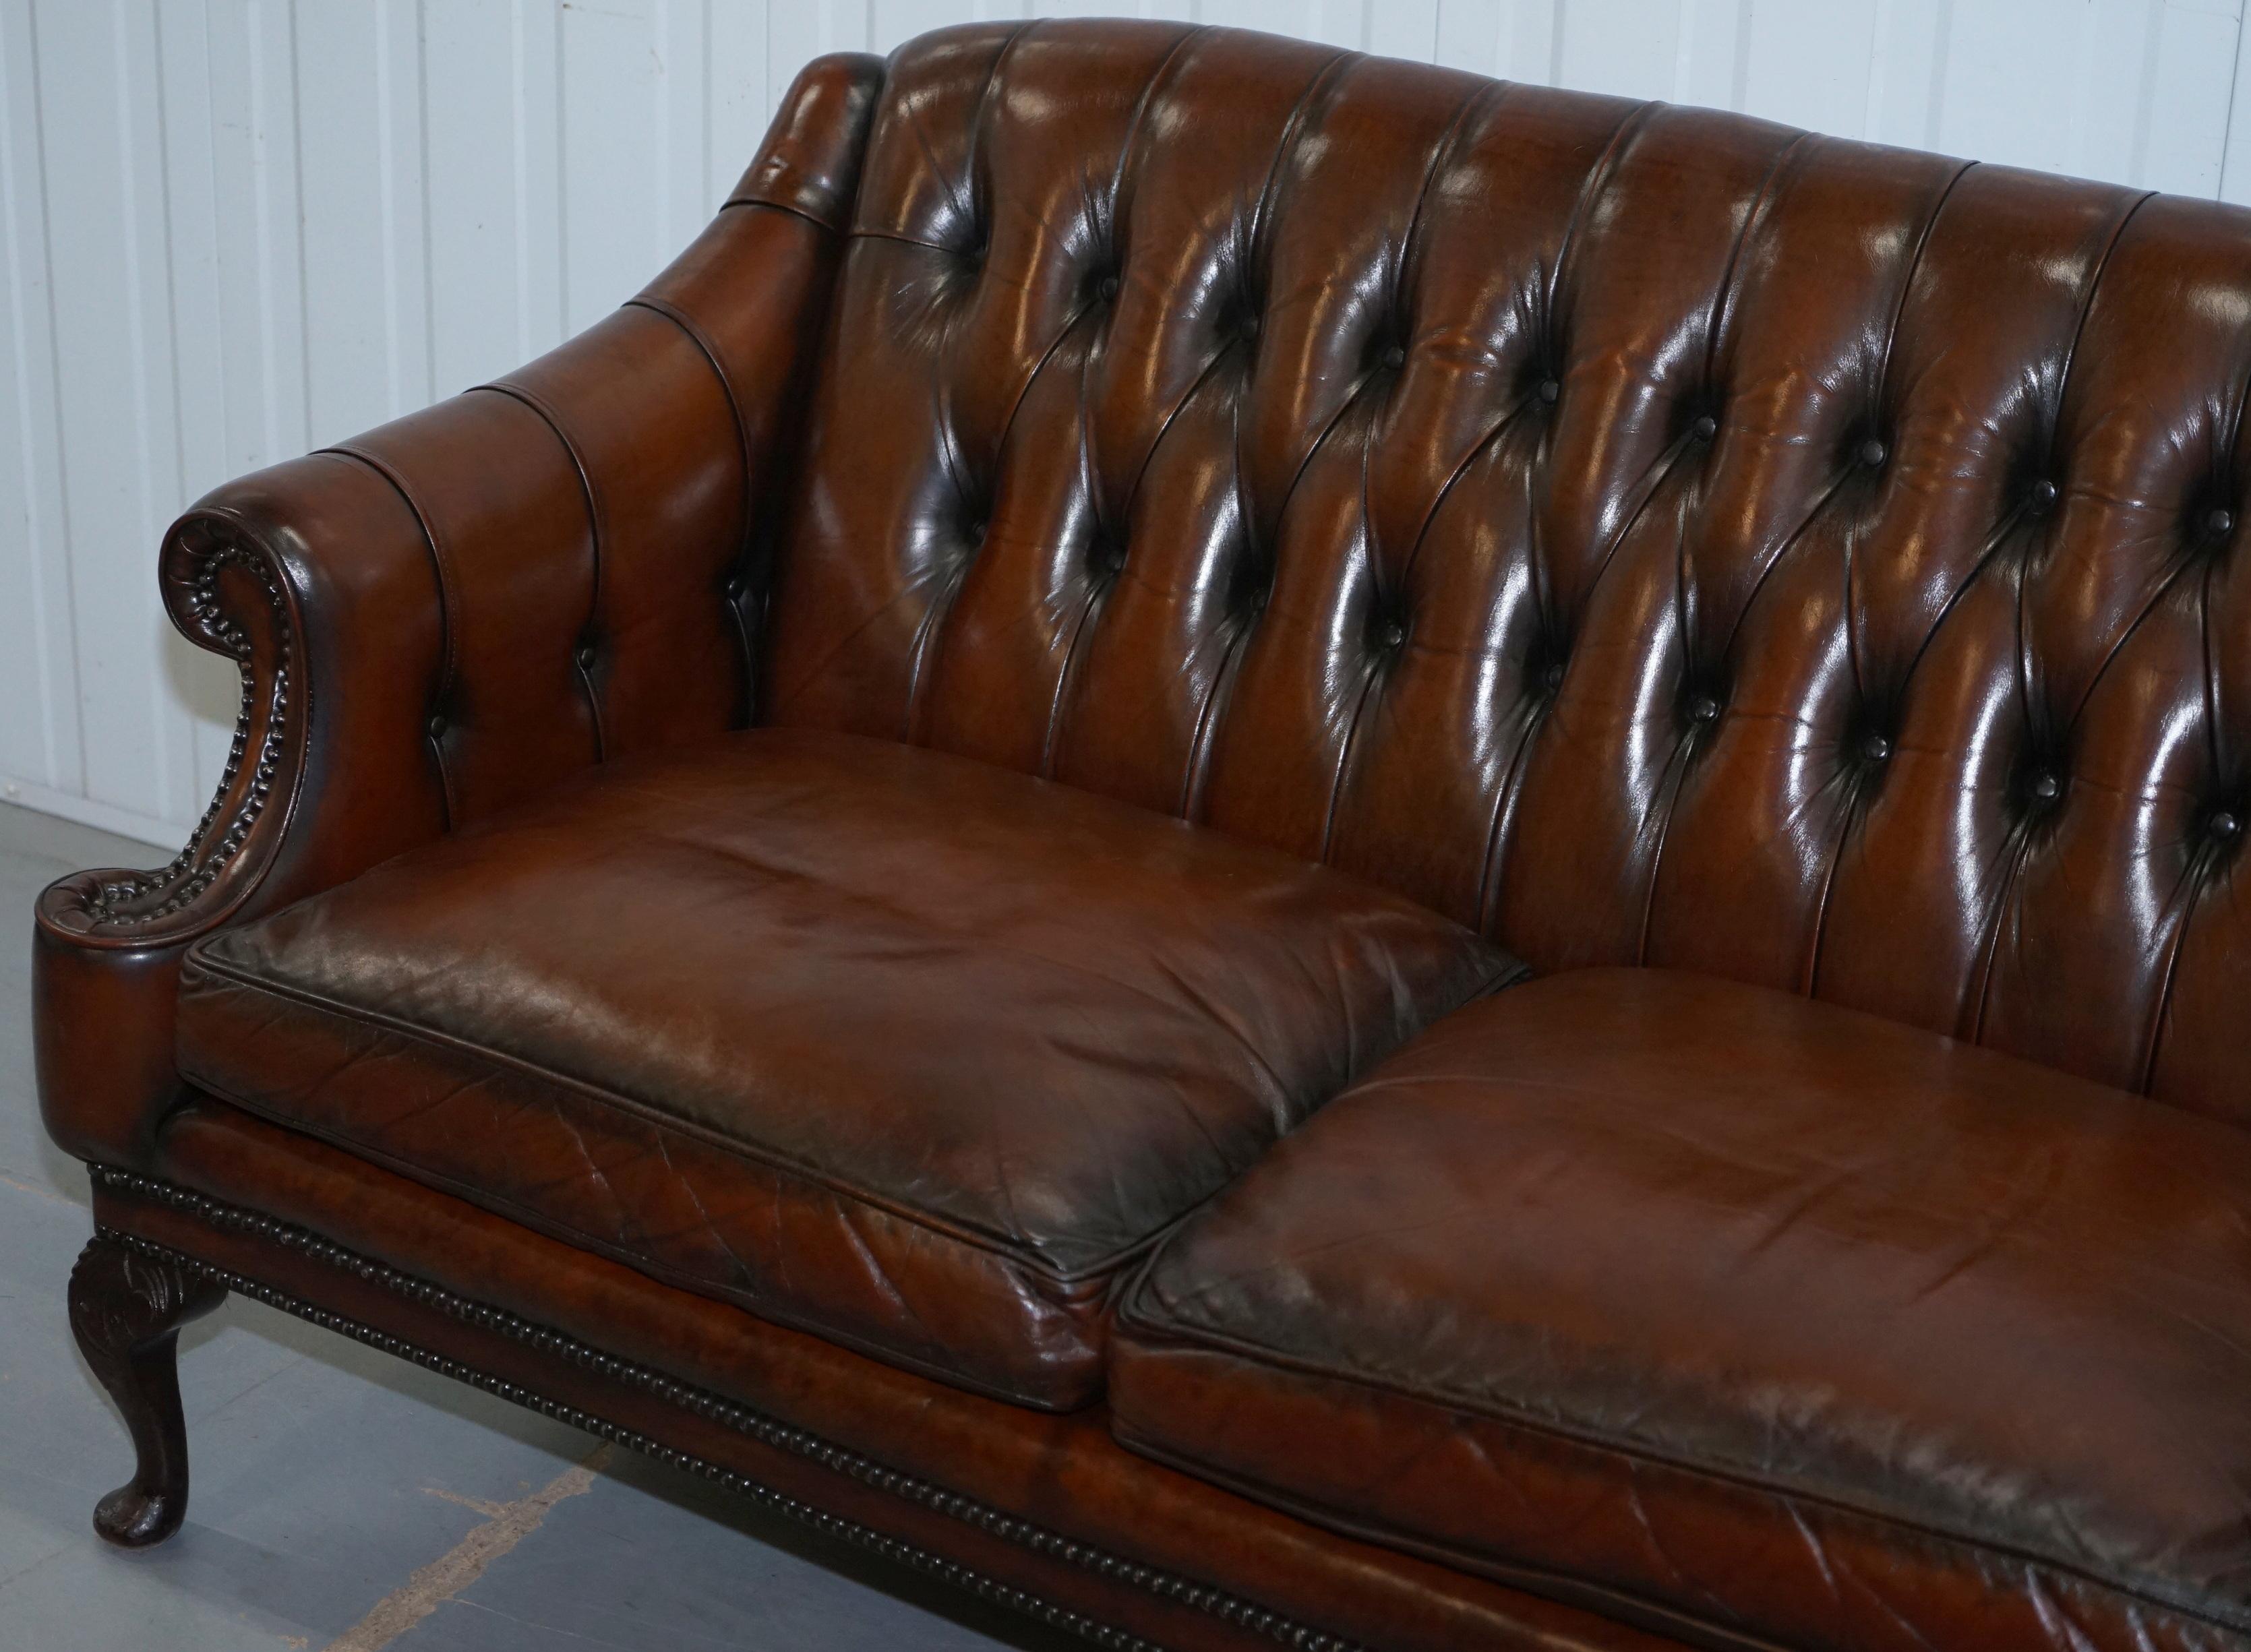 Hand-Crafted Pair of Restored Lutyen's Viceroy Chesterfield Brown Leather Hand Dyed Sofas